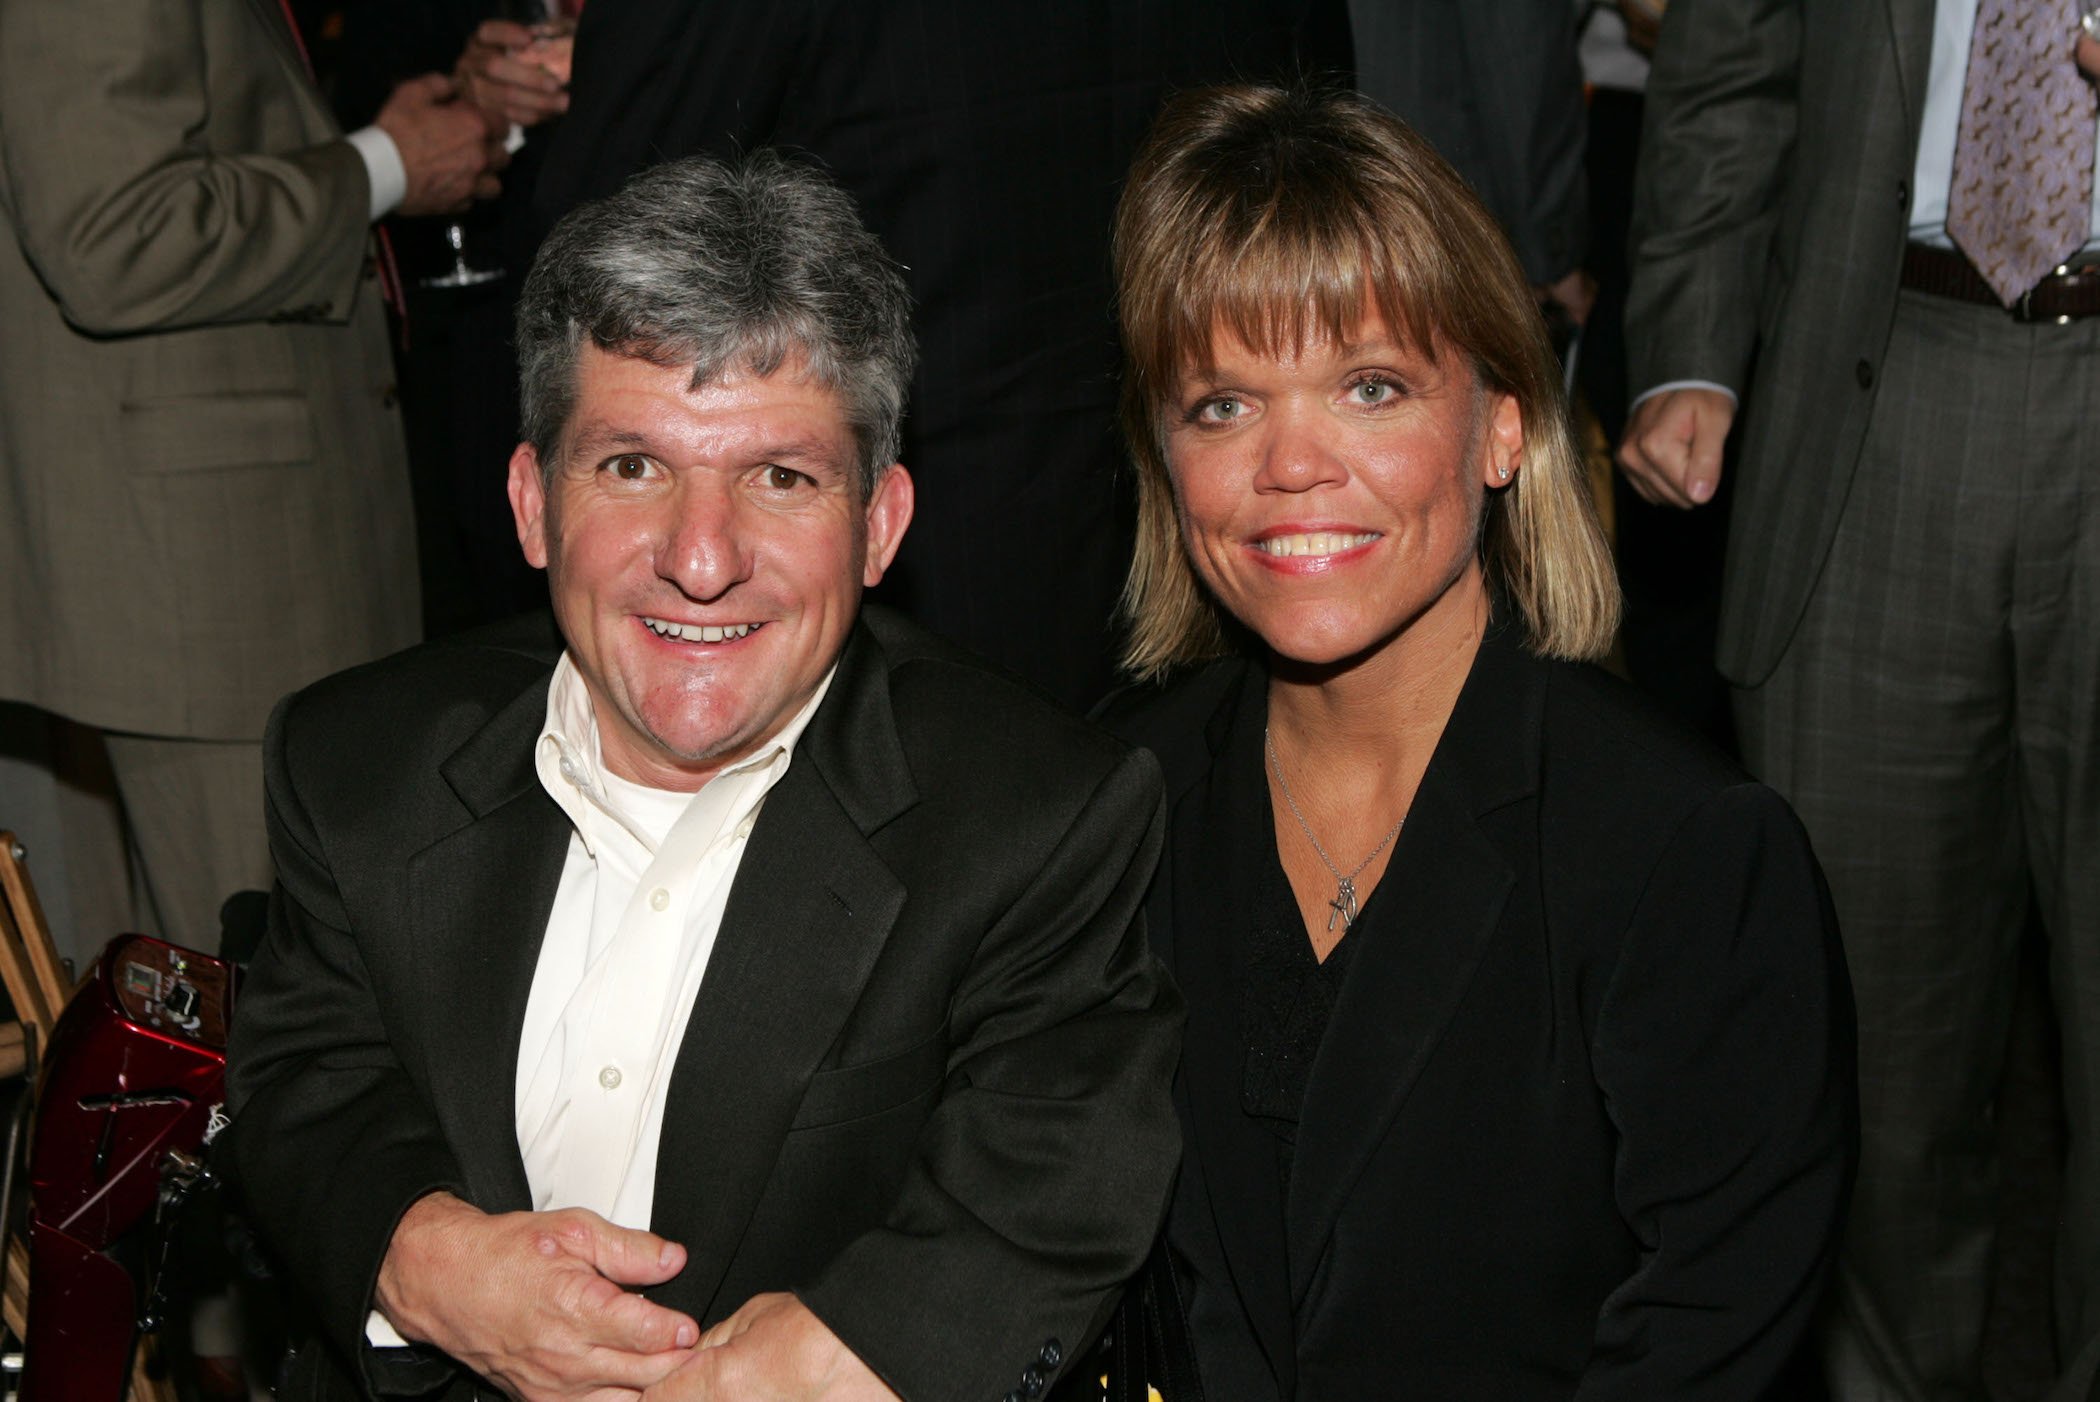 Roloff Farms owner Matt Roloff sitting next to ex-wife Amy Roloff against a black background. The Roloffs are from Matt and Amy Roloff from 'Little People, Big World'